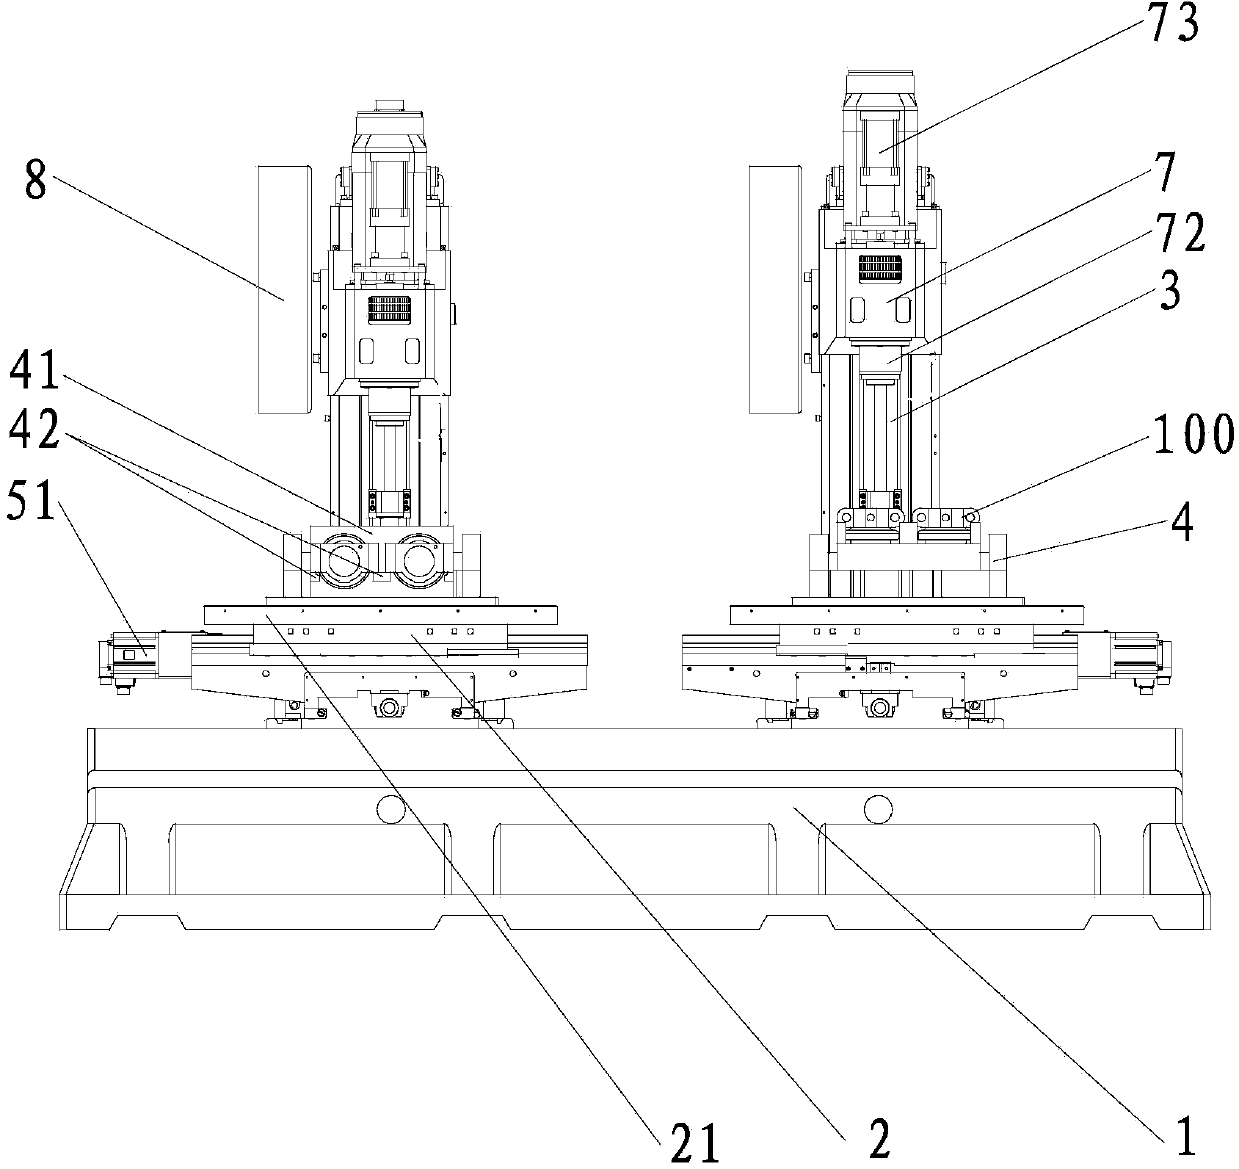 Automatic machining equipment for supporting wheel side covers